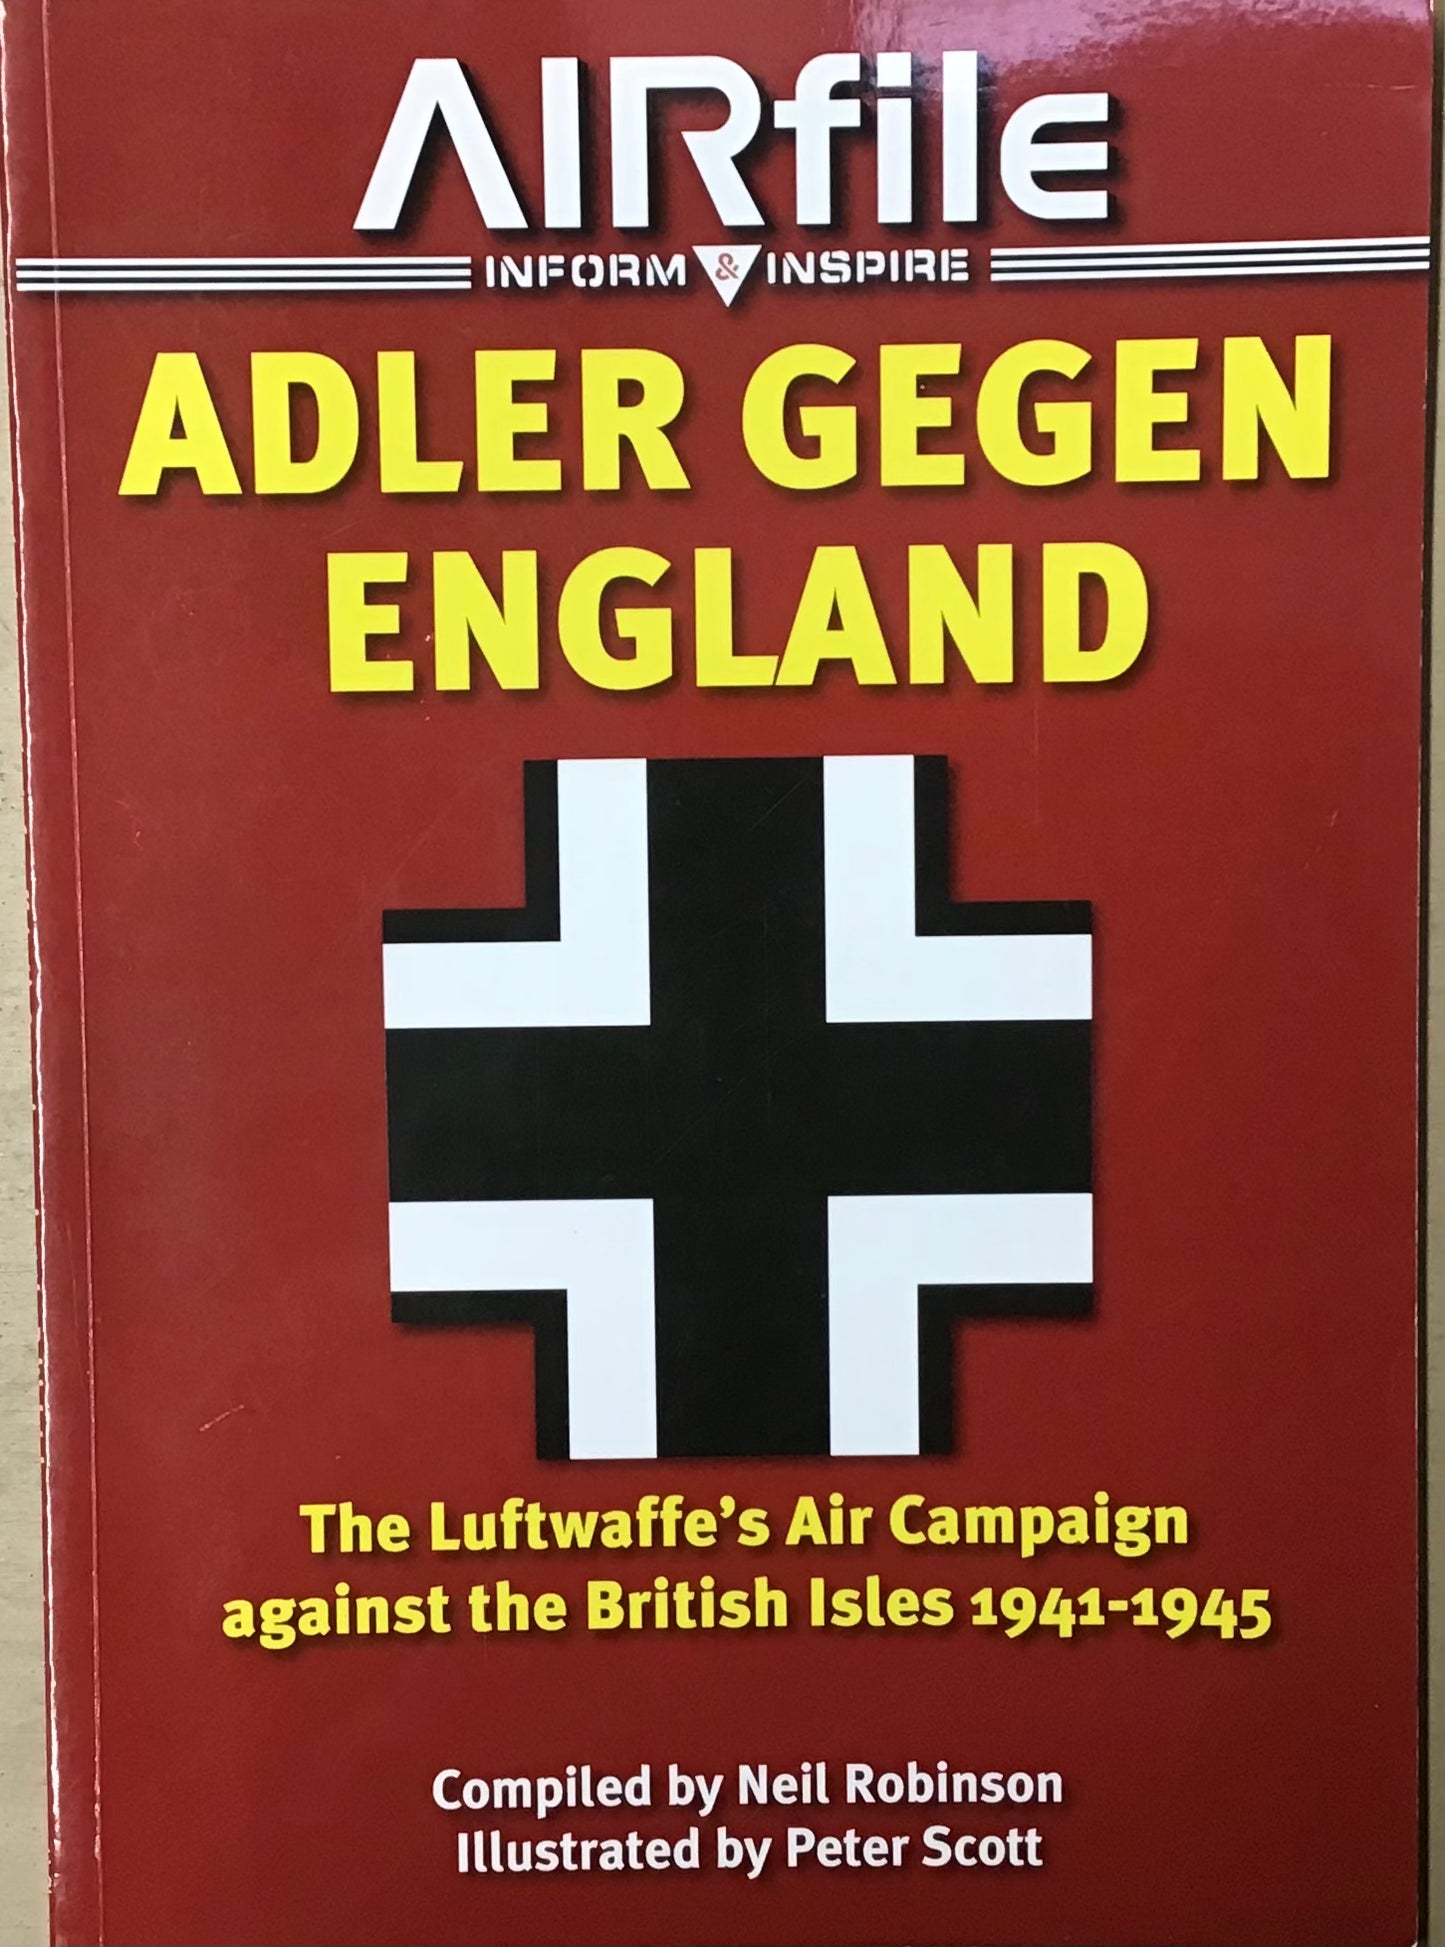 Adler Gegen England: The Luftwaffe's Air Campaign against the British Isles 1941-1945 by Neil Robinson & Peter Scott - Chester Model Centre